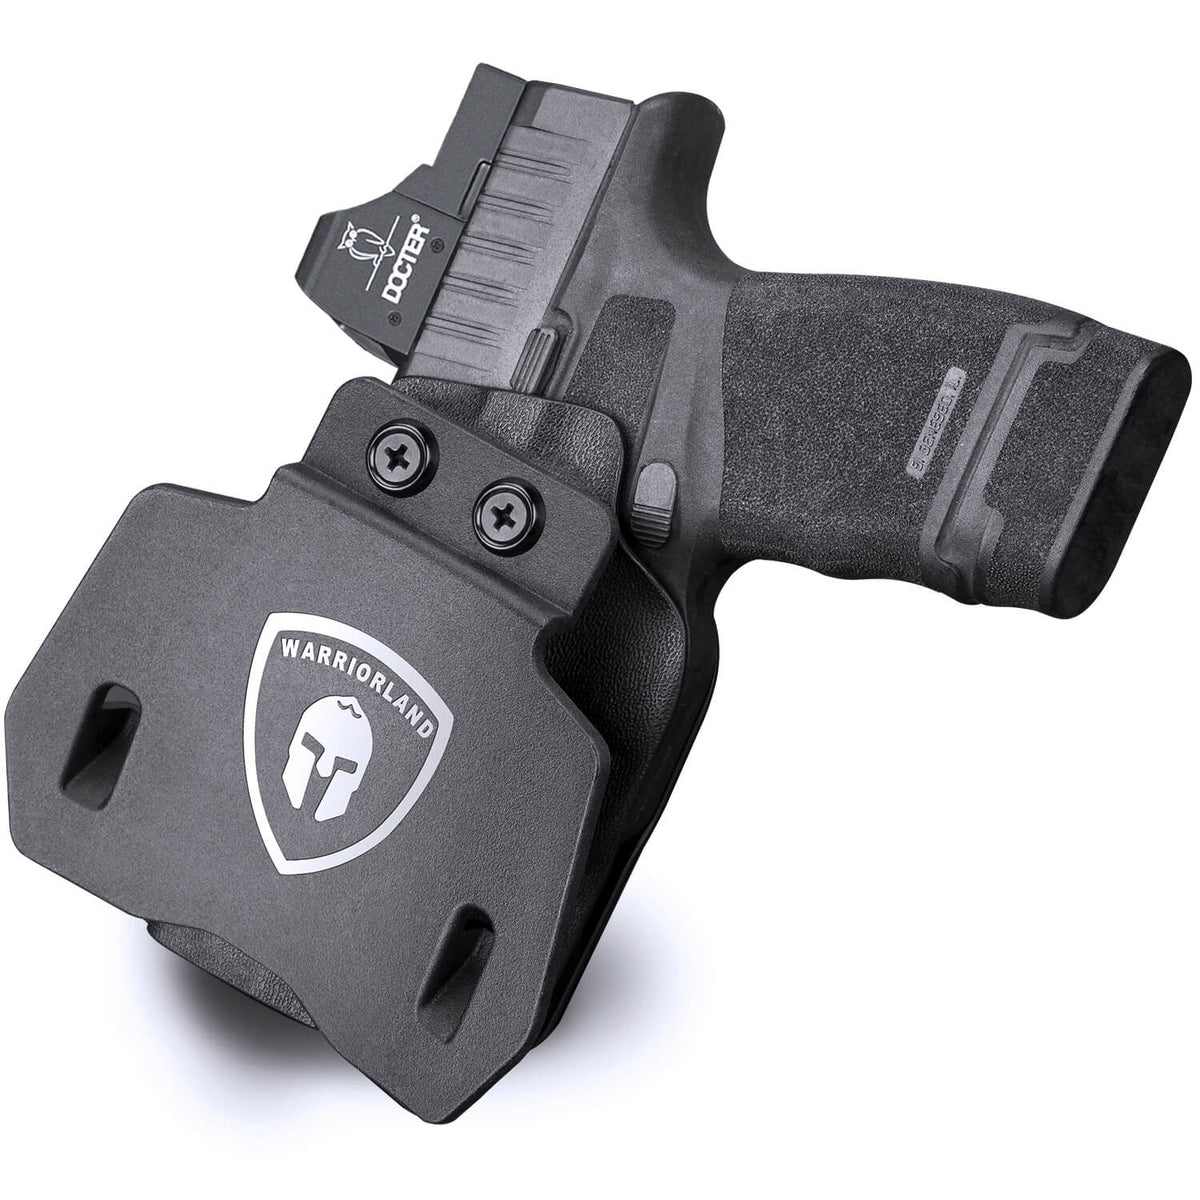 Kydex OWB Paddle Holster for Springfield Armory Hellcat Pro with red dot sights optics cut Trigger Guard Appendix Open Carry | WARRIORLAND